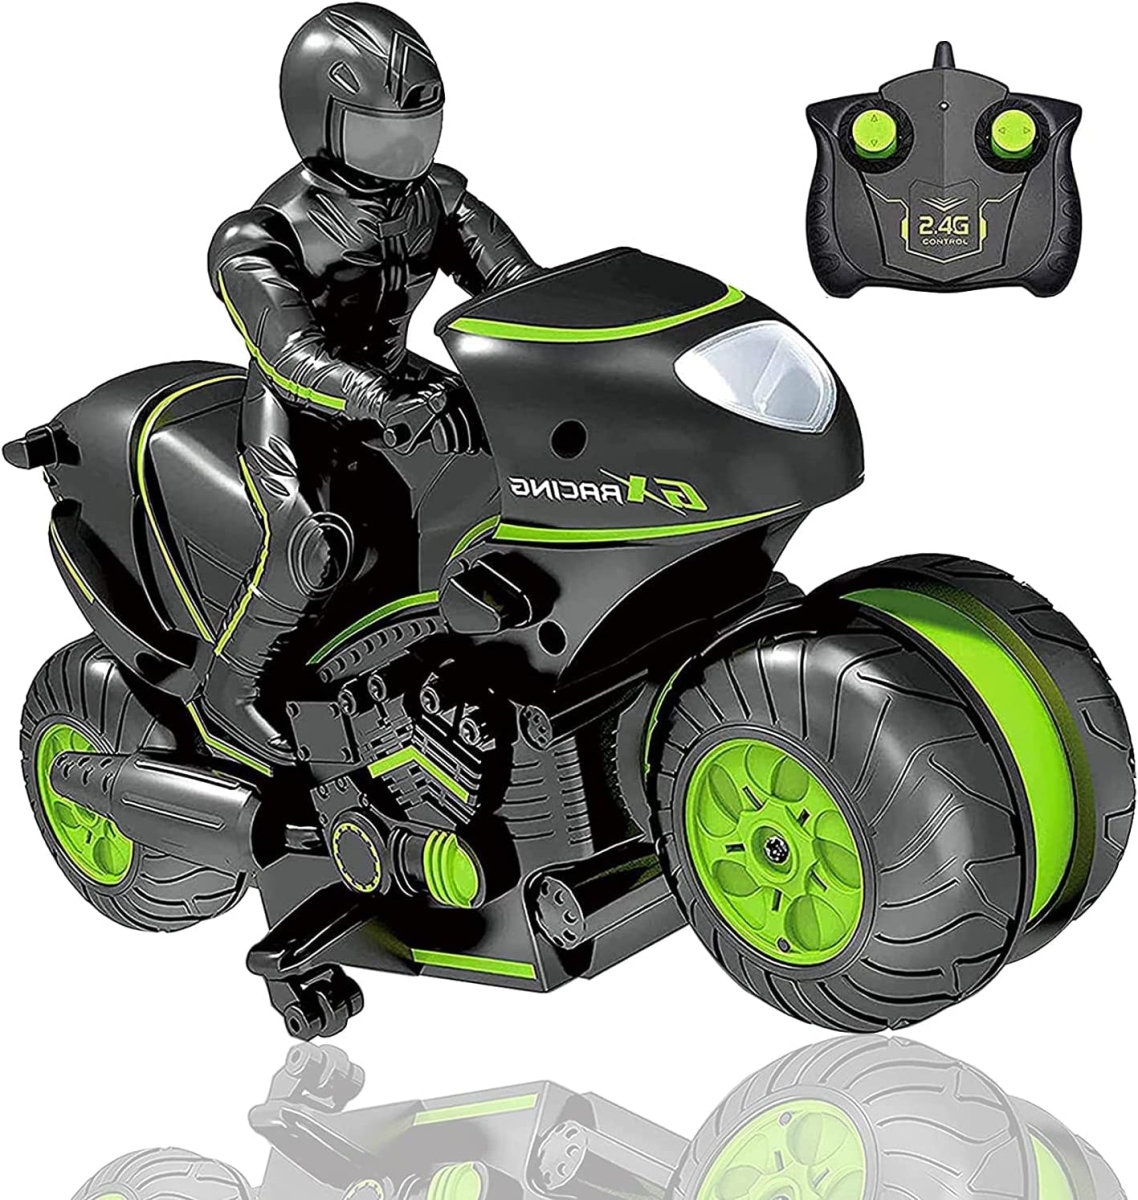 Picture of iBot NC33047-AM 2.4GHz Kids Masefu Stunt Remote Control Power Wheel Racing Motorcycle for Unisex